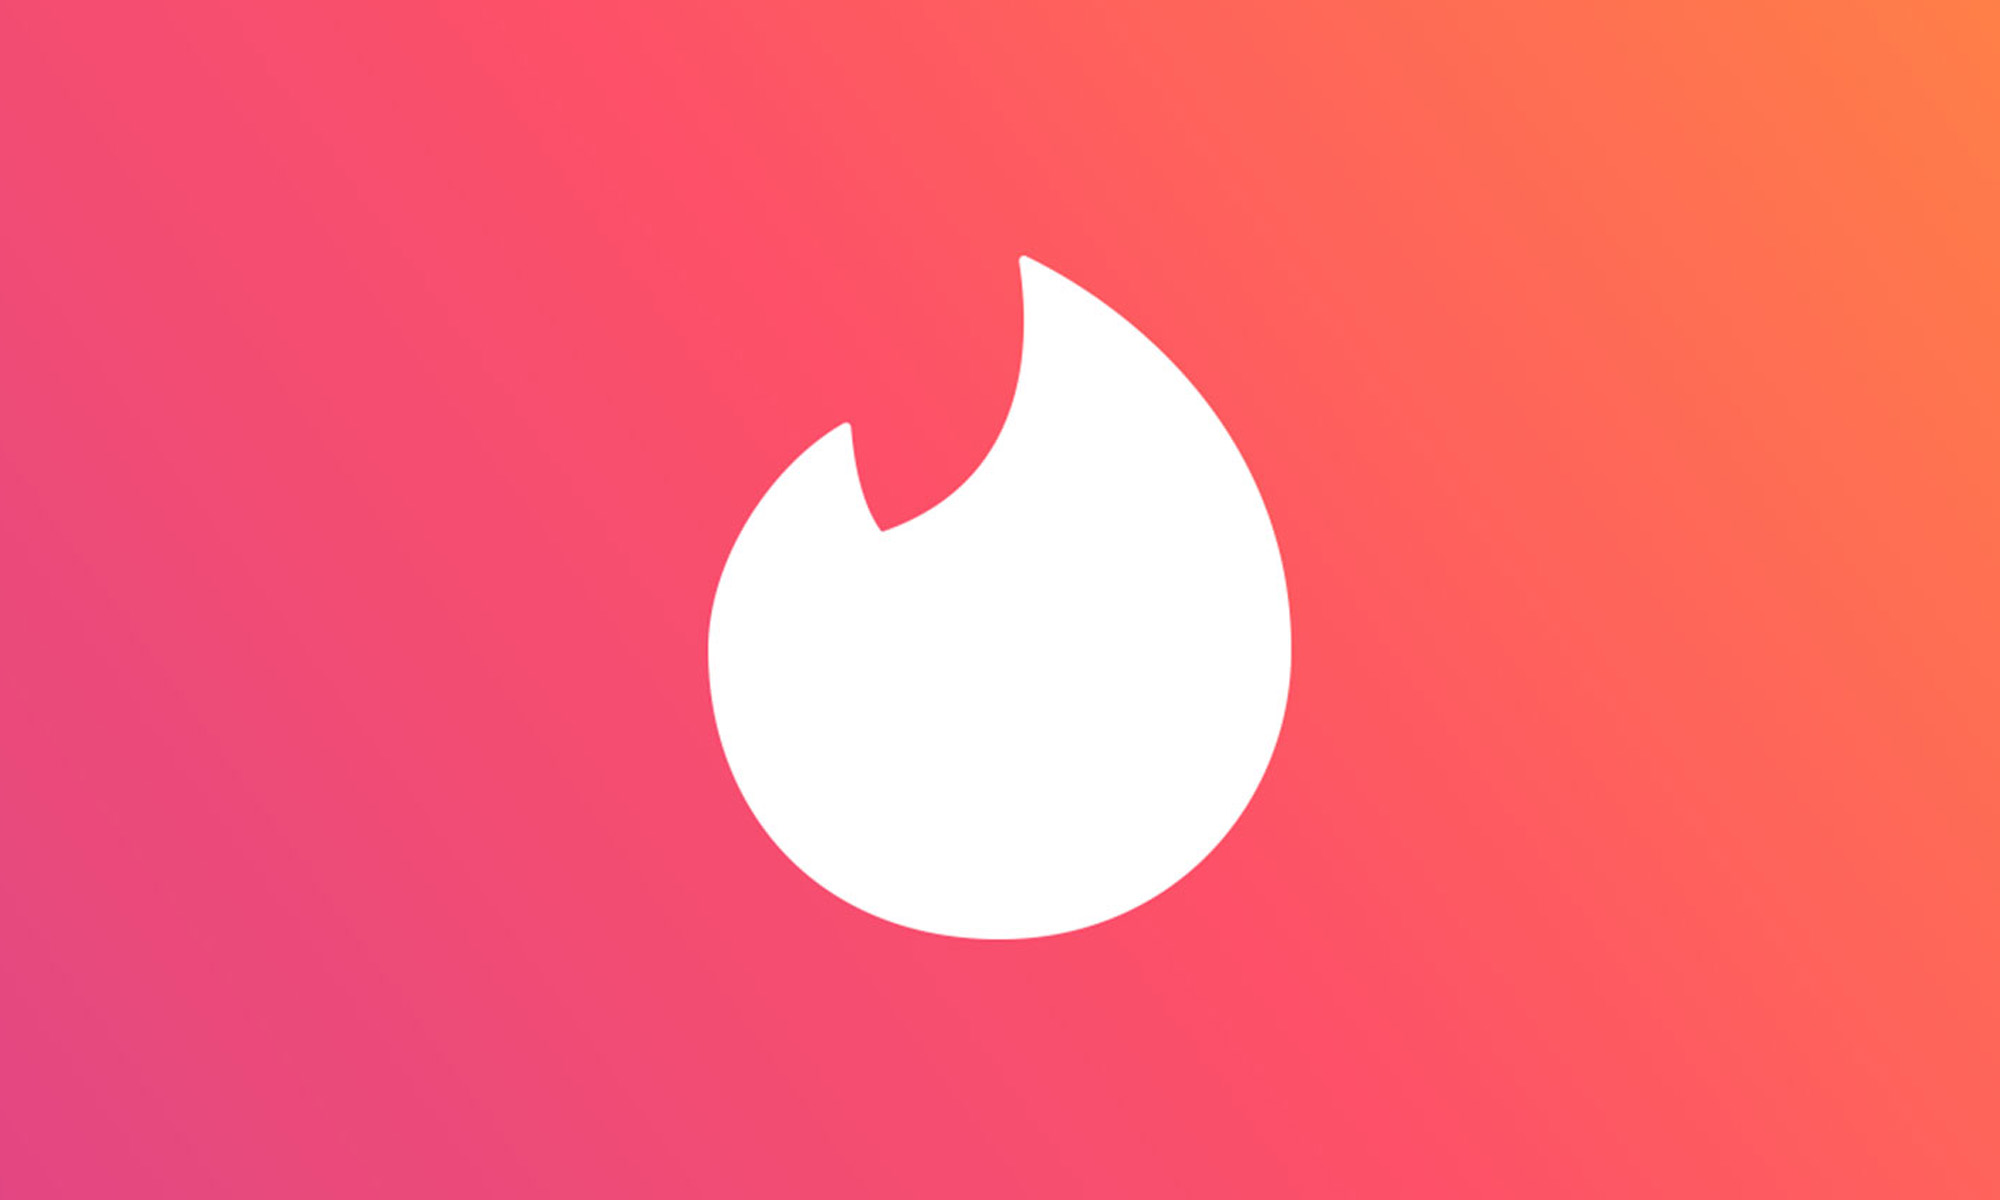 tinder will soon let you background check your matches